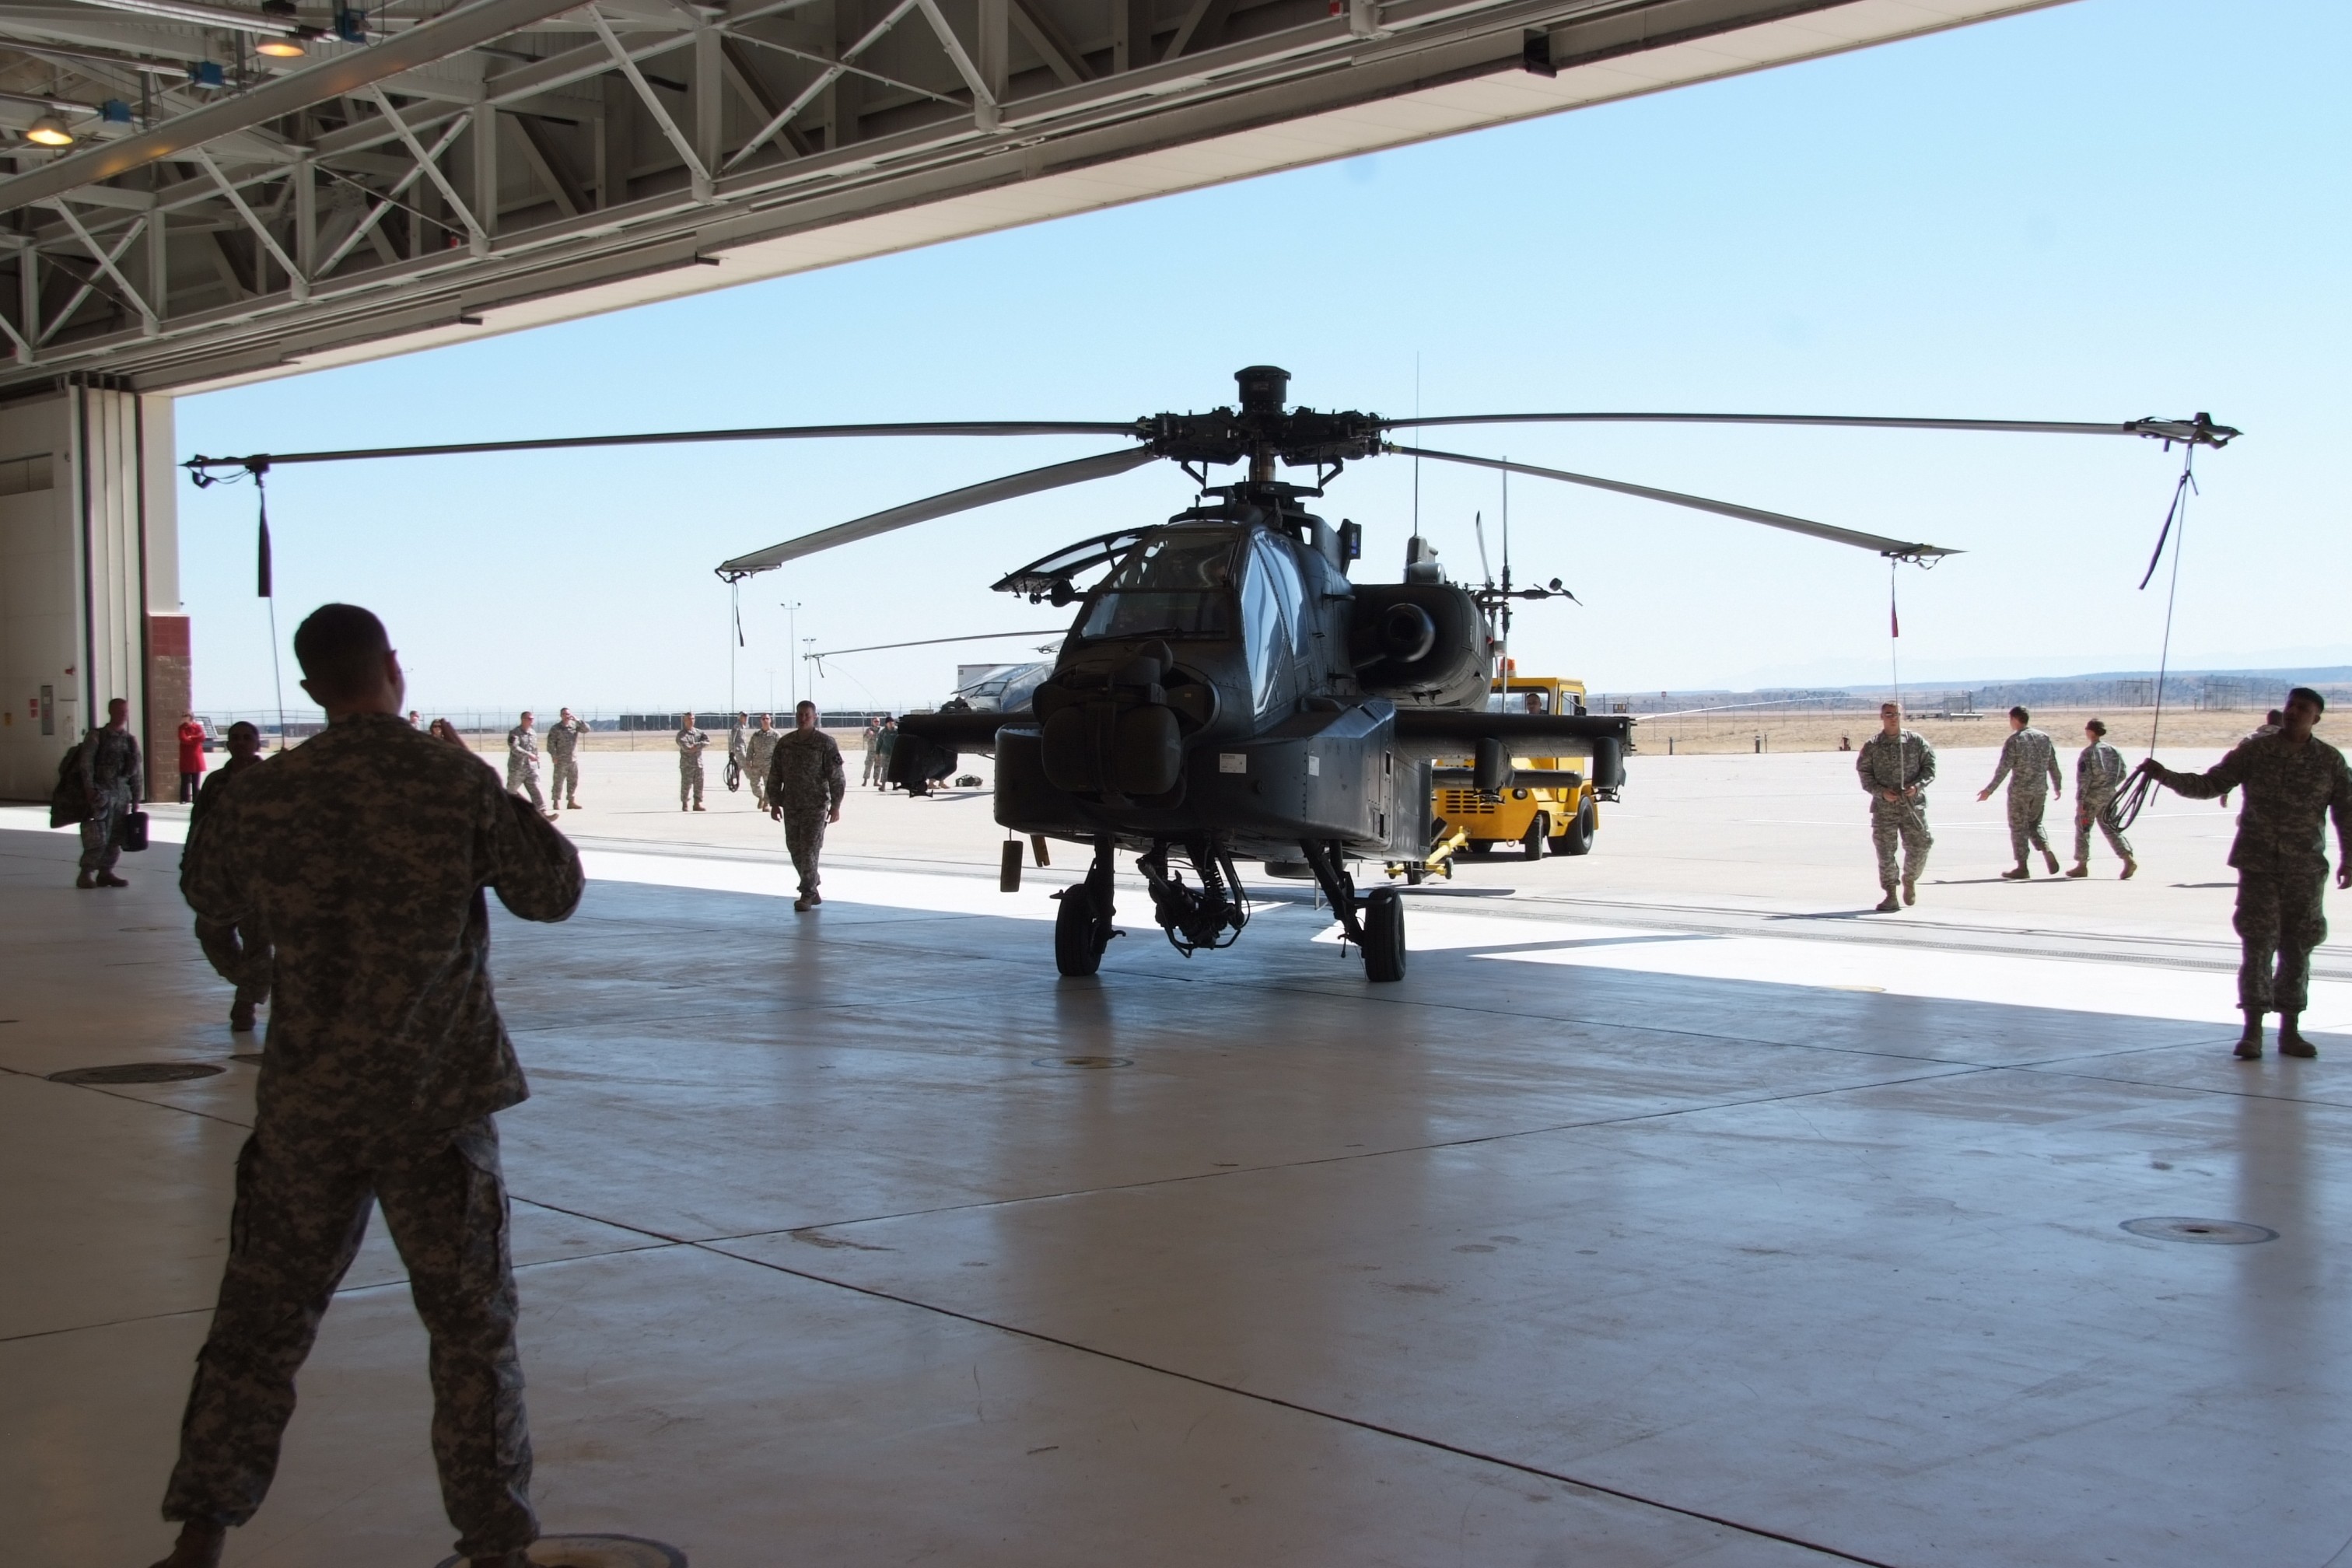 Fort Carson new home to Apaches | Article | The United States Army